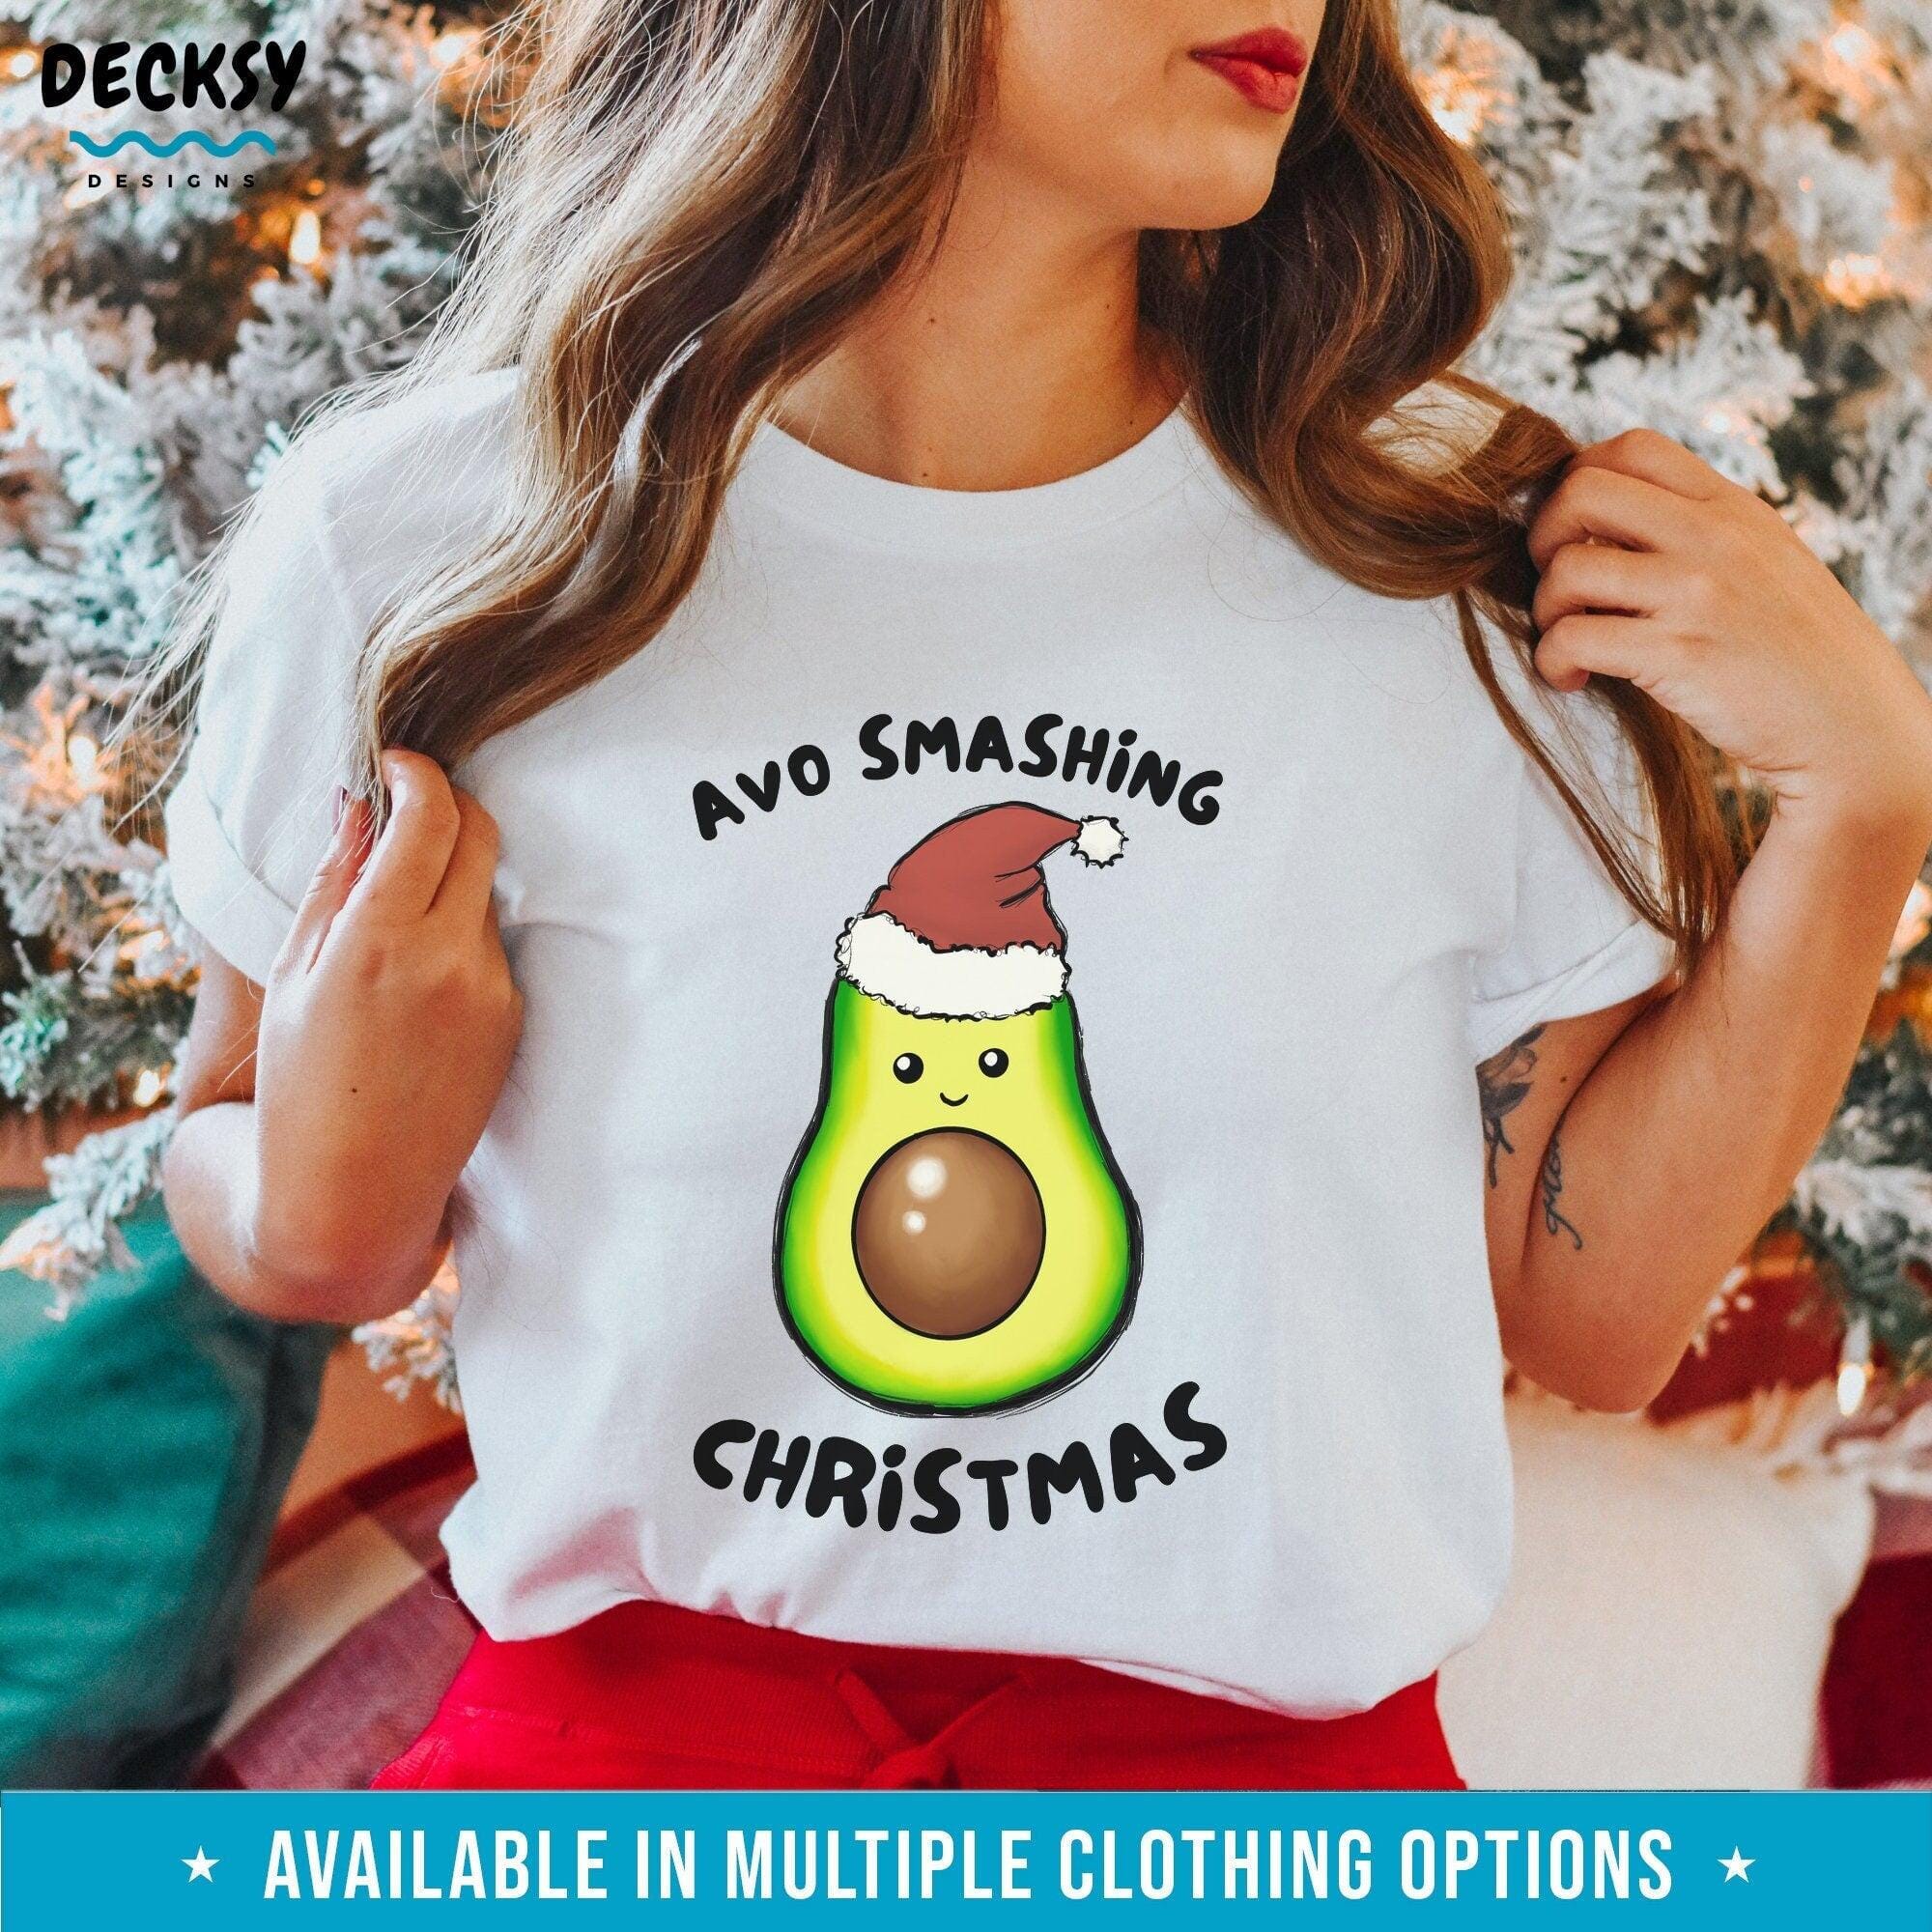 Cute Avocado Christmas Shirt, Gift For Christmas-Clothing:Gender-Neutral Adult Clothing:Tops & Tees:T-shirts:Graphic Tees-DecksyDesigns